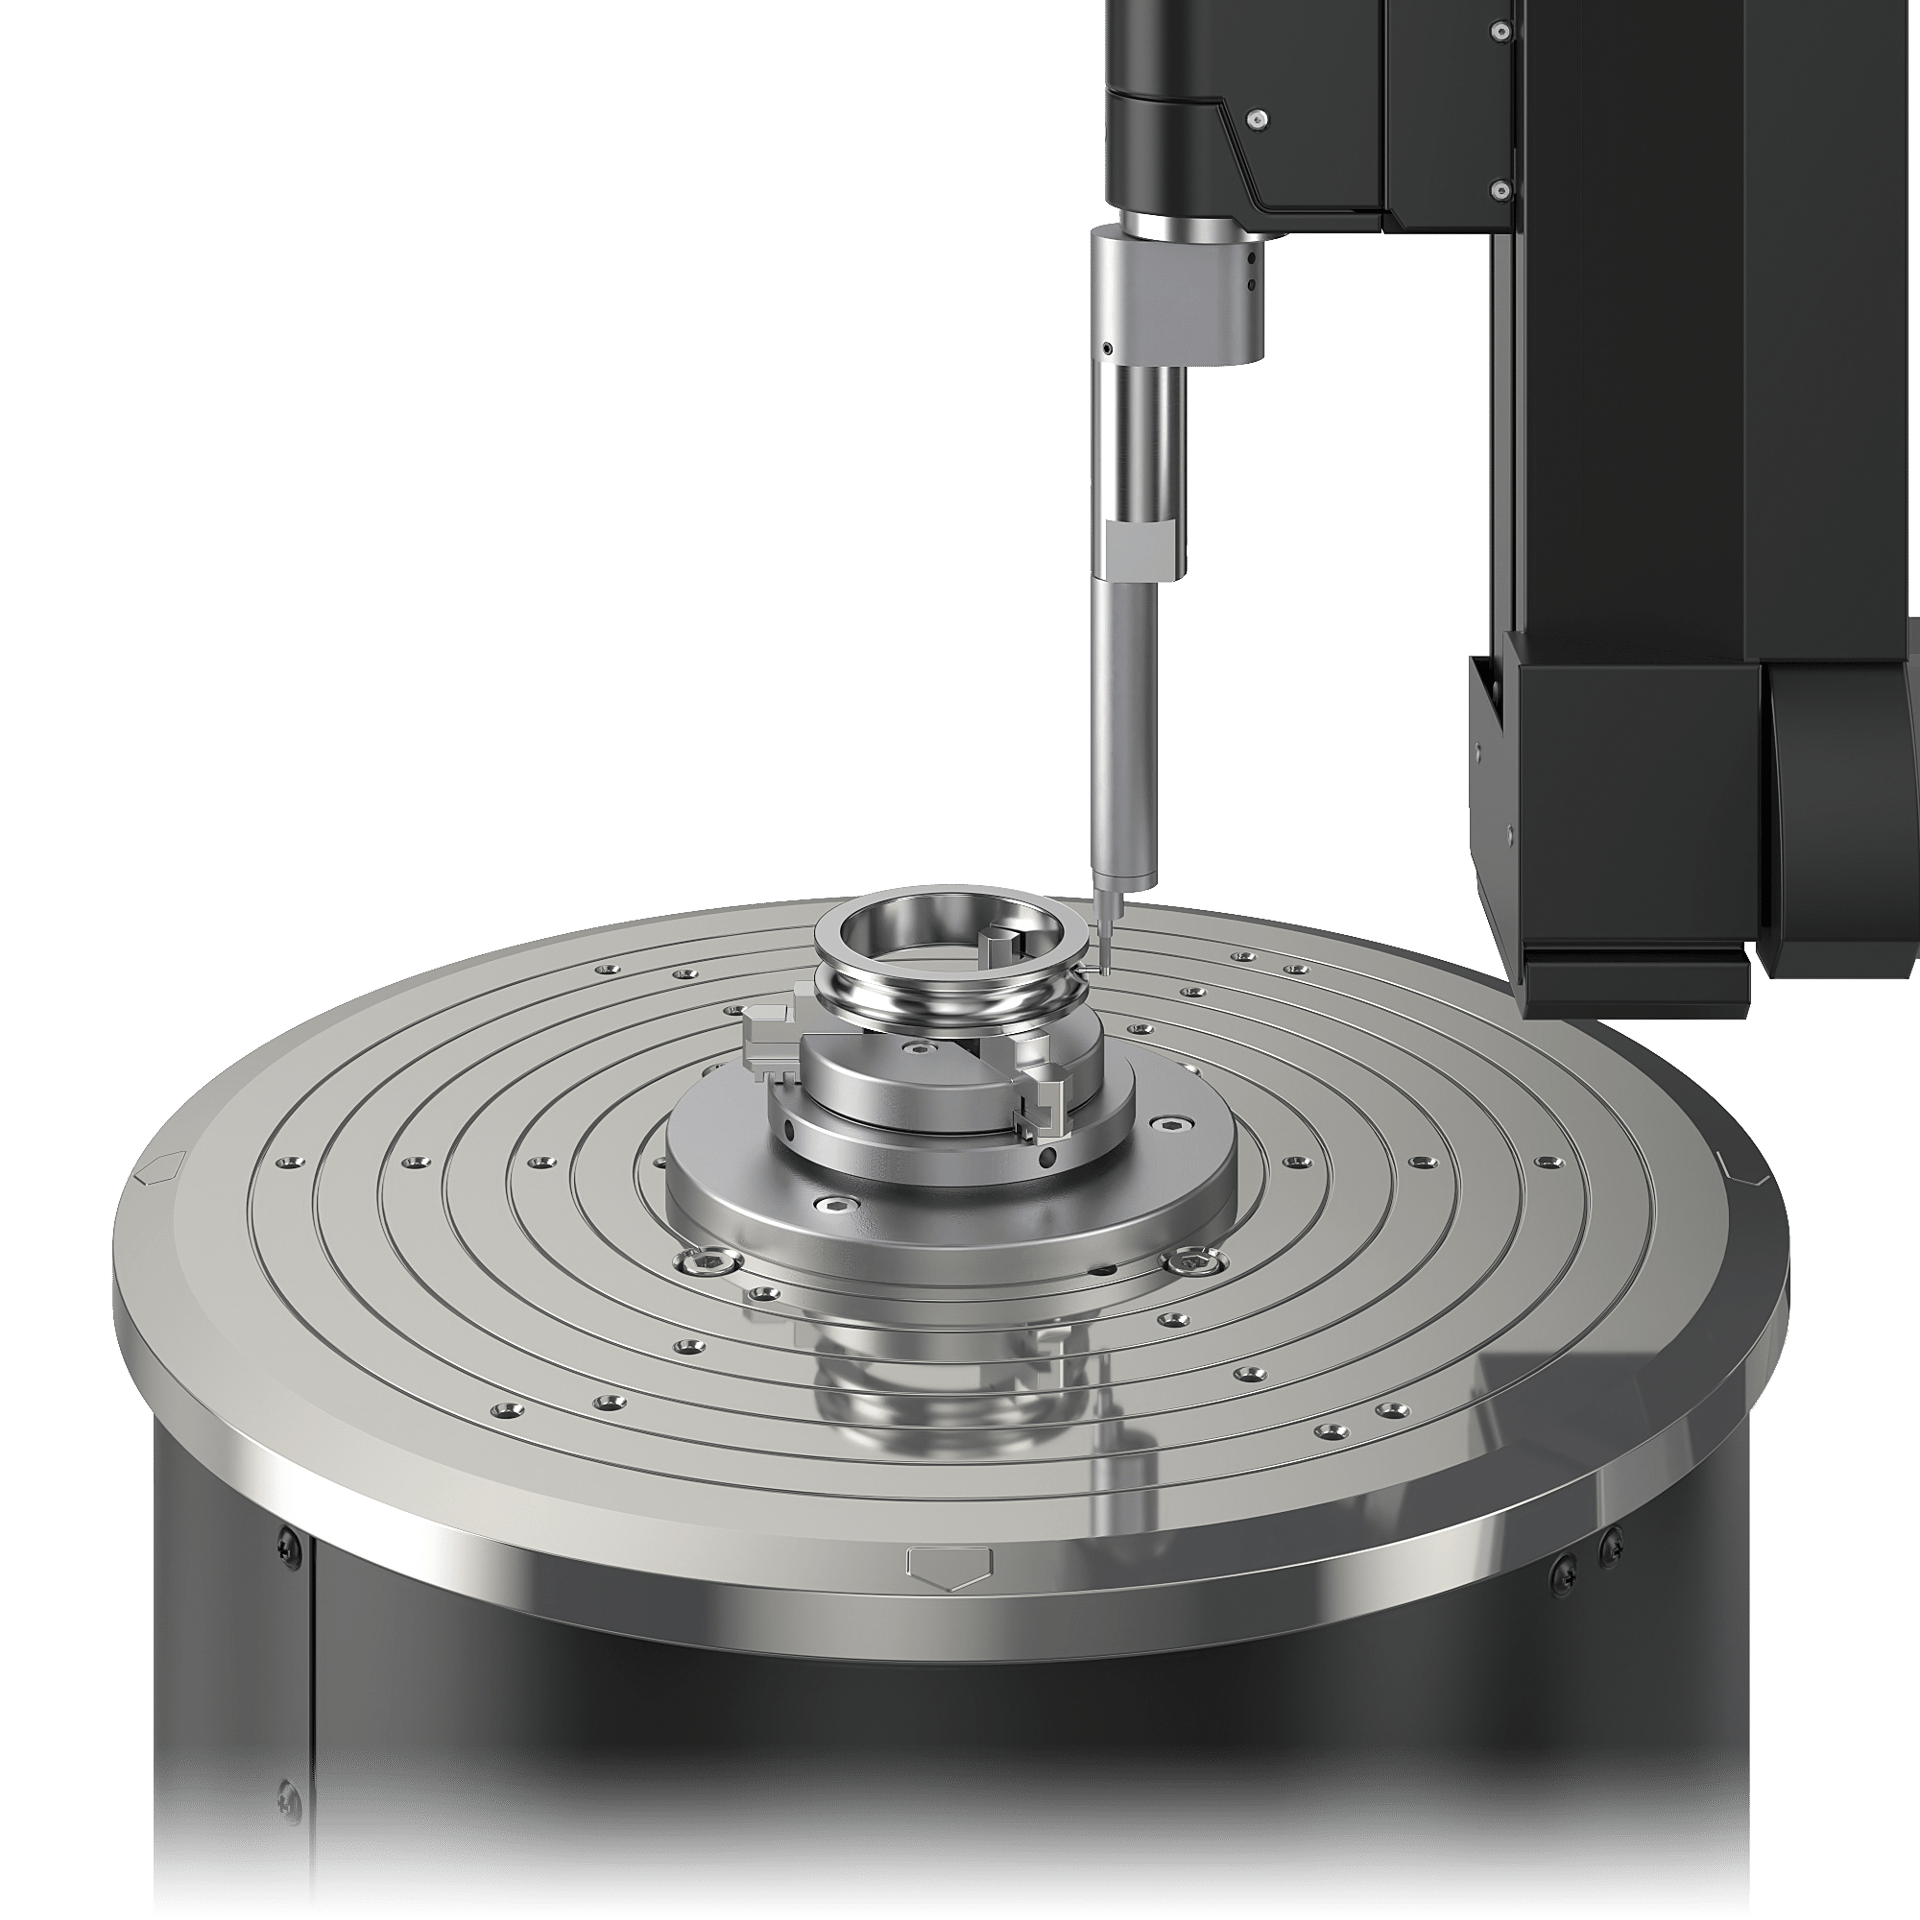 surface roughness of bearings requires high-precision measurement 